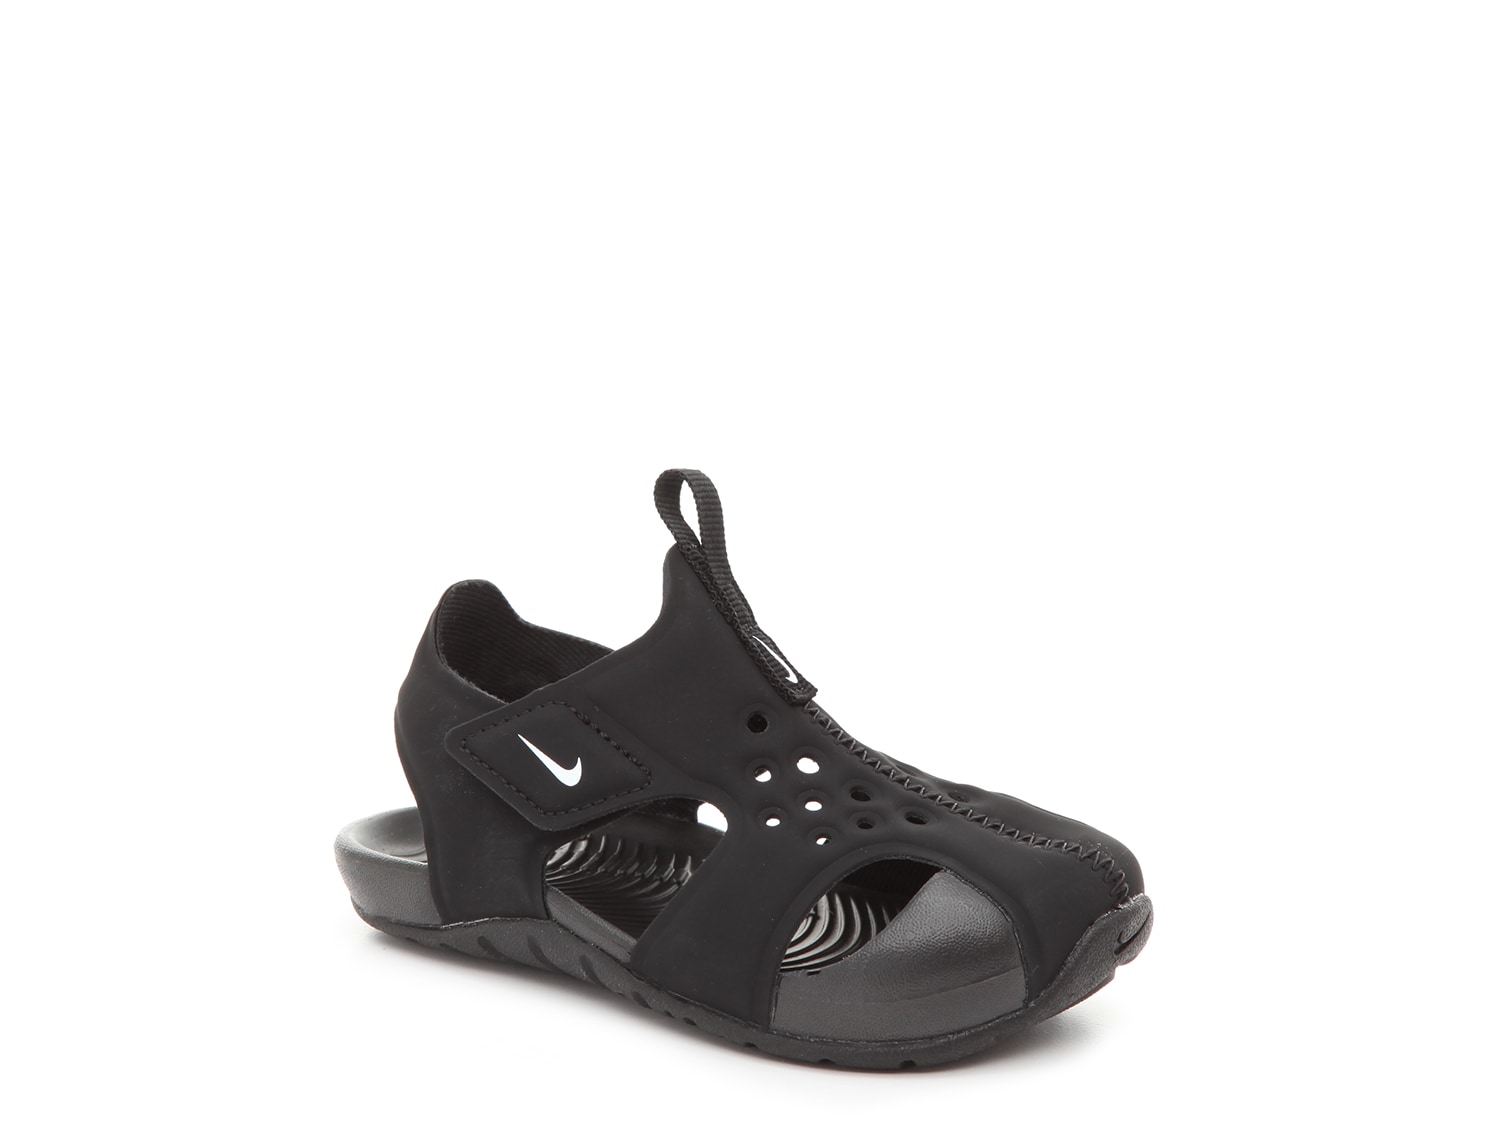 baby nike sandals size 4